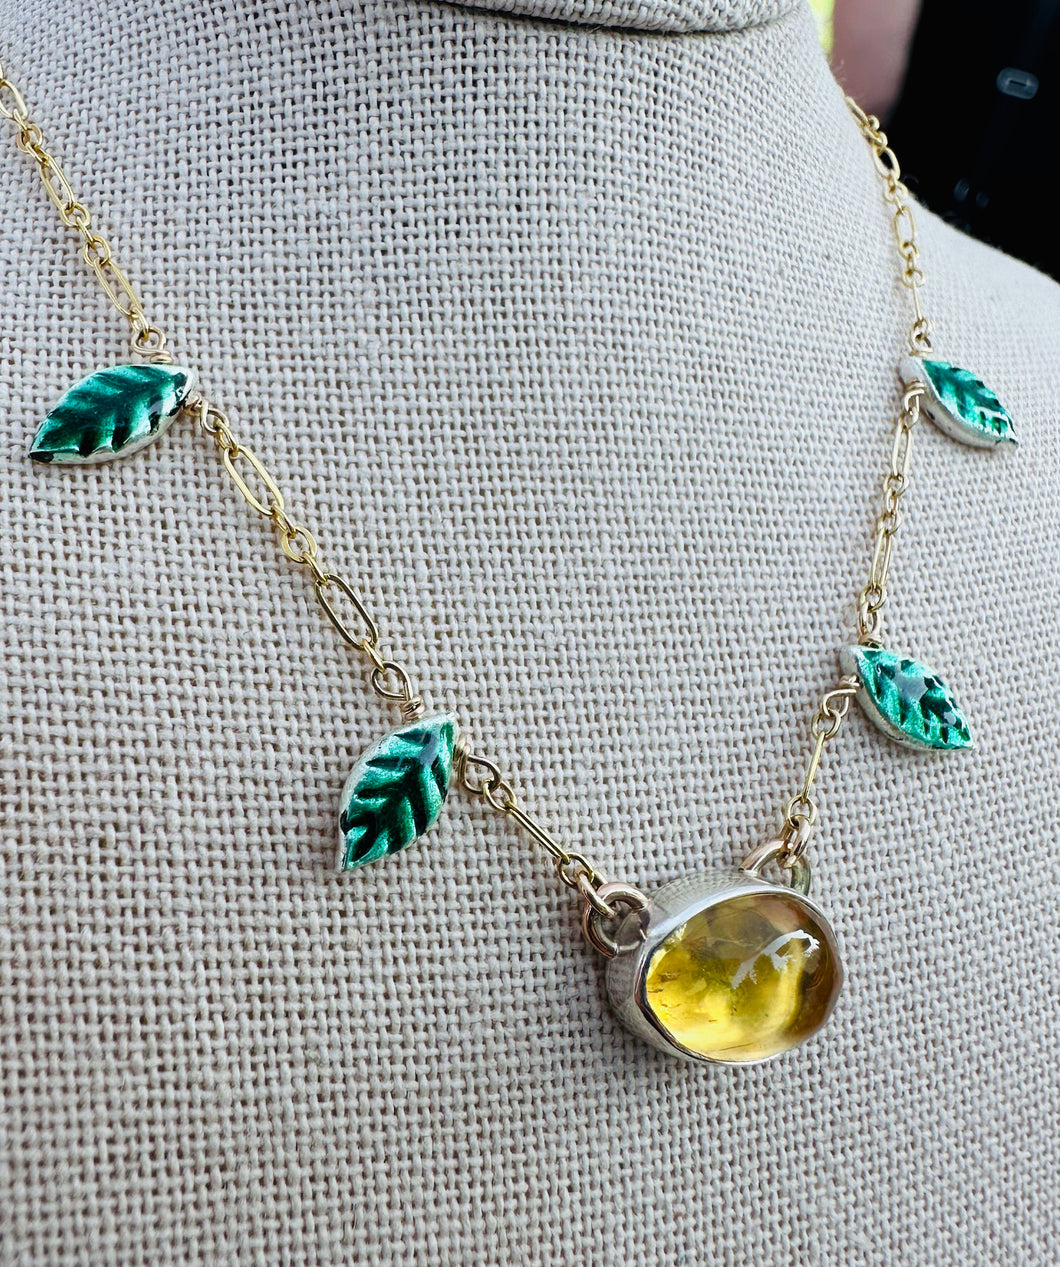 Farmer's Market Necklace - 14k Gold Fill and Silver